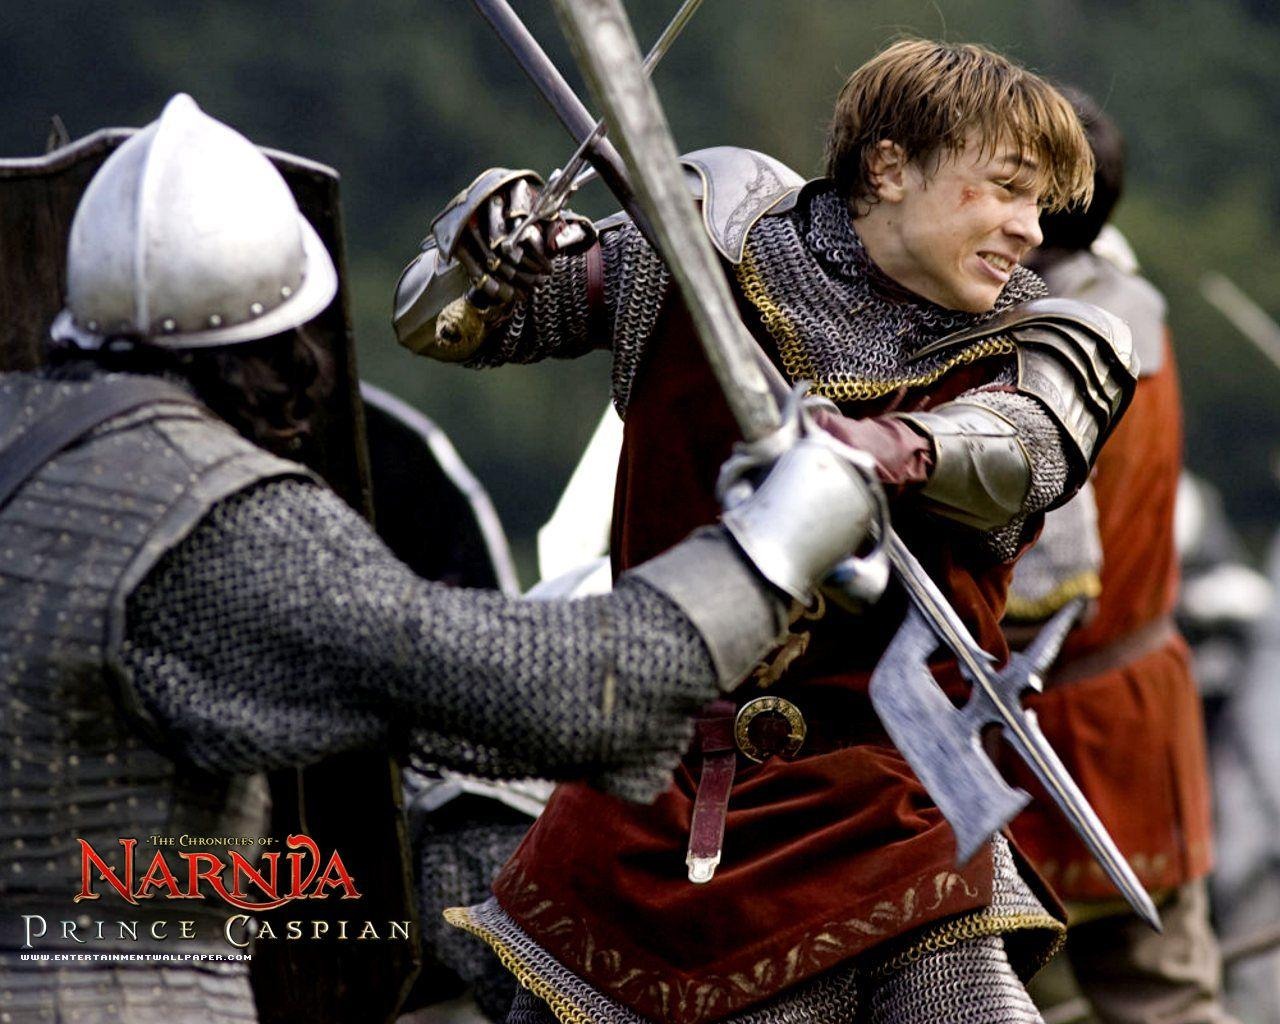 The Chronicles of Narnia 2: Prince Caspian #6 - 1280x1024